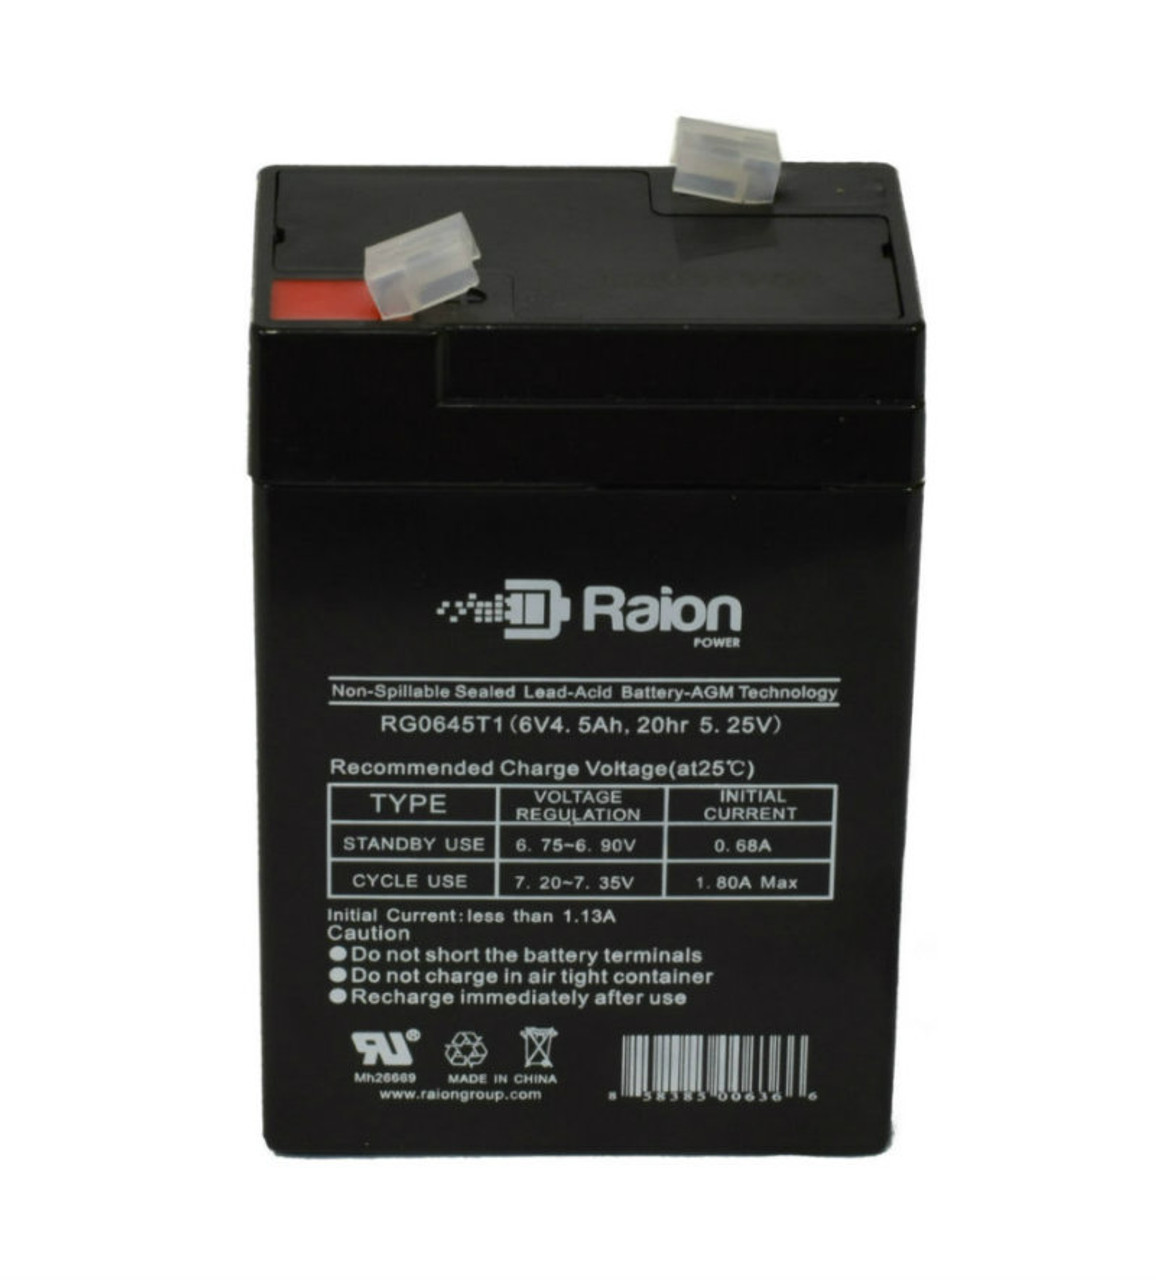 Raion Power RG0645T1 Replacement Battery Cartridge for Teledyne 2RL6S5R